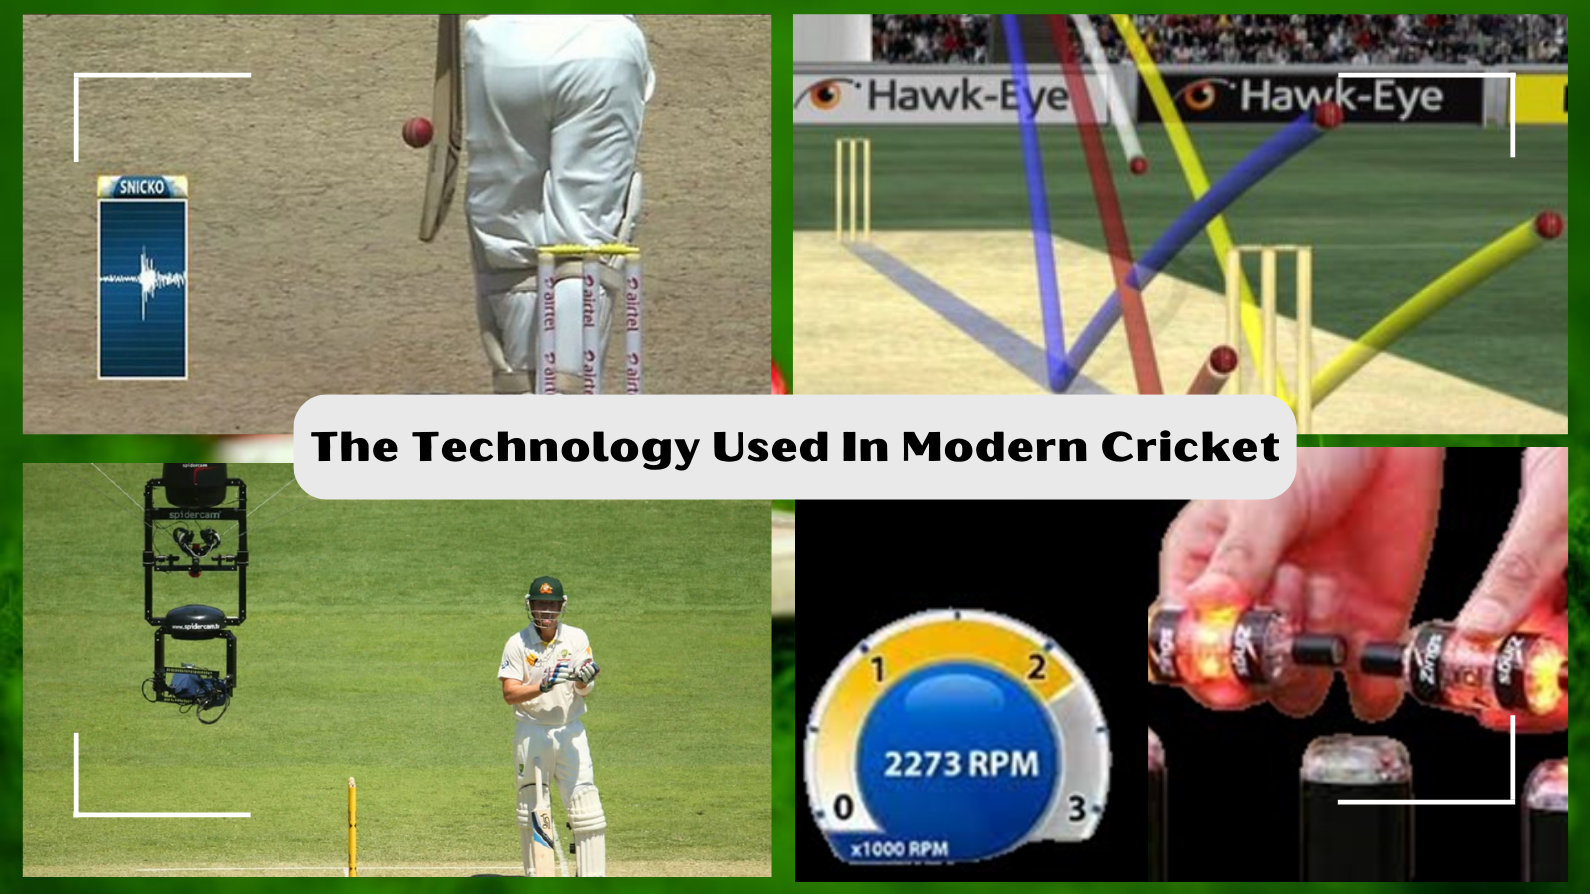 The Technology used in Modern Cricket | Decision Review System, Snicko-meter and more